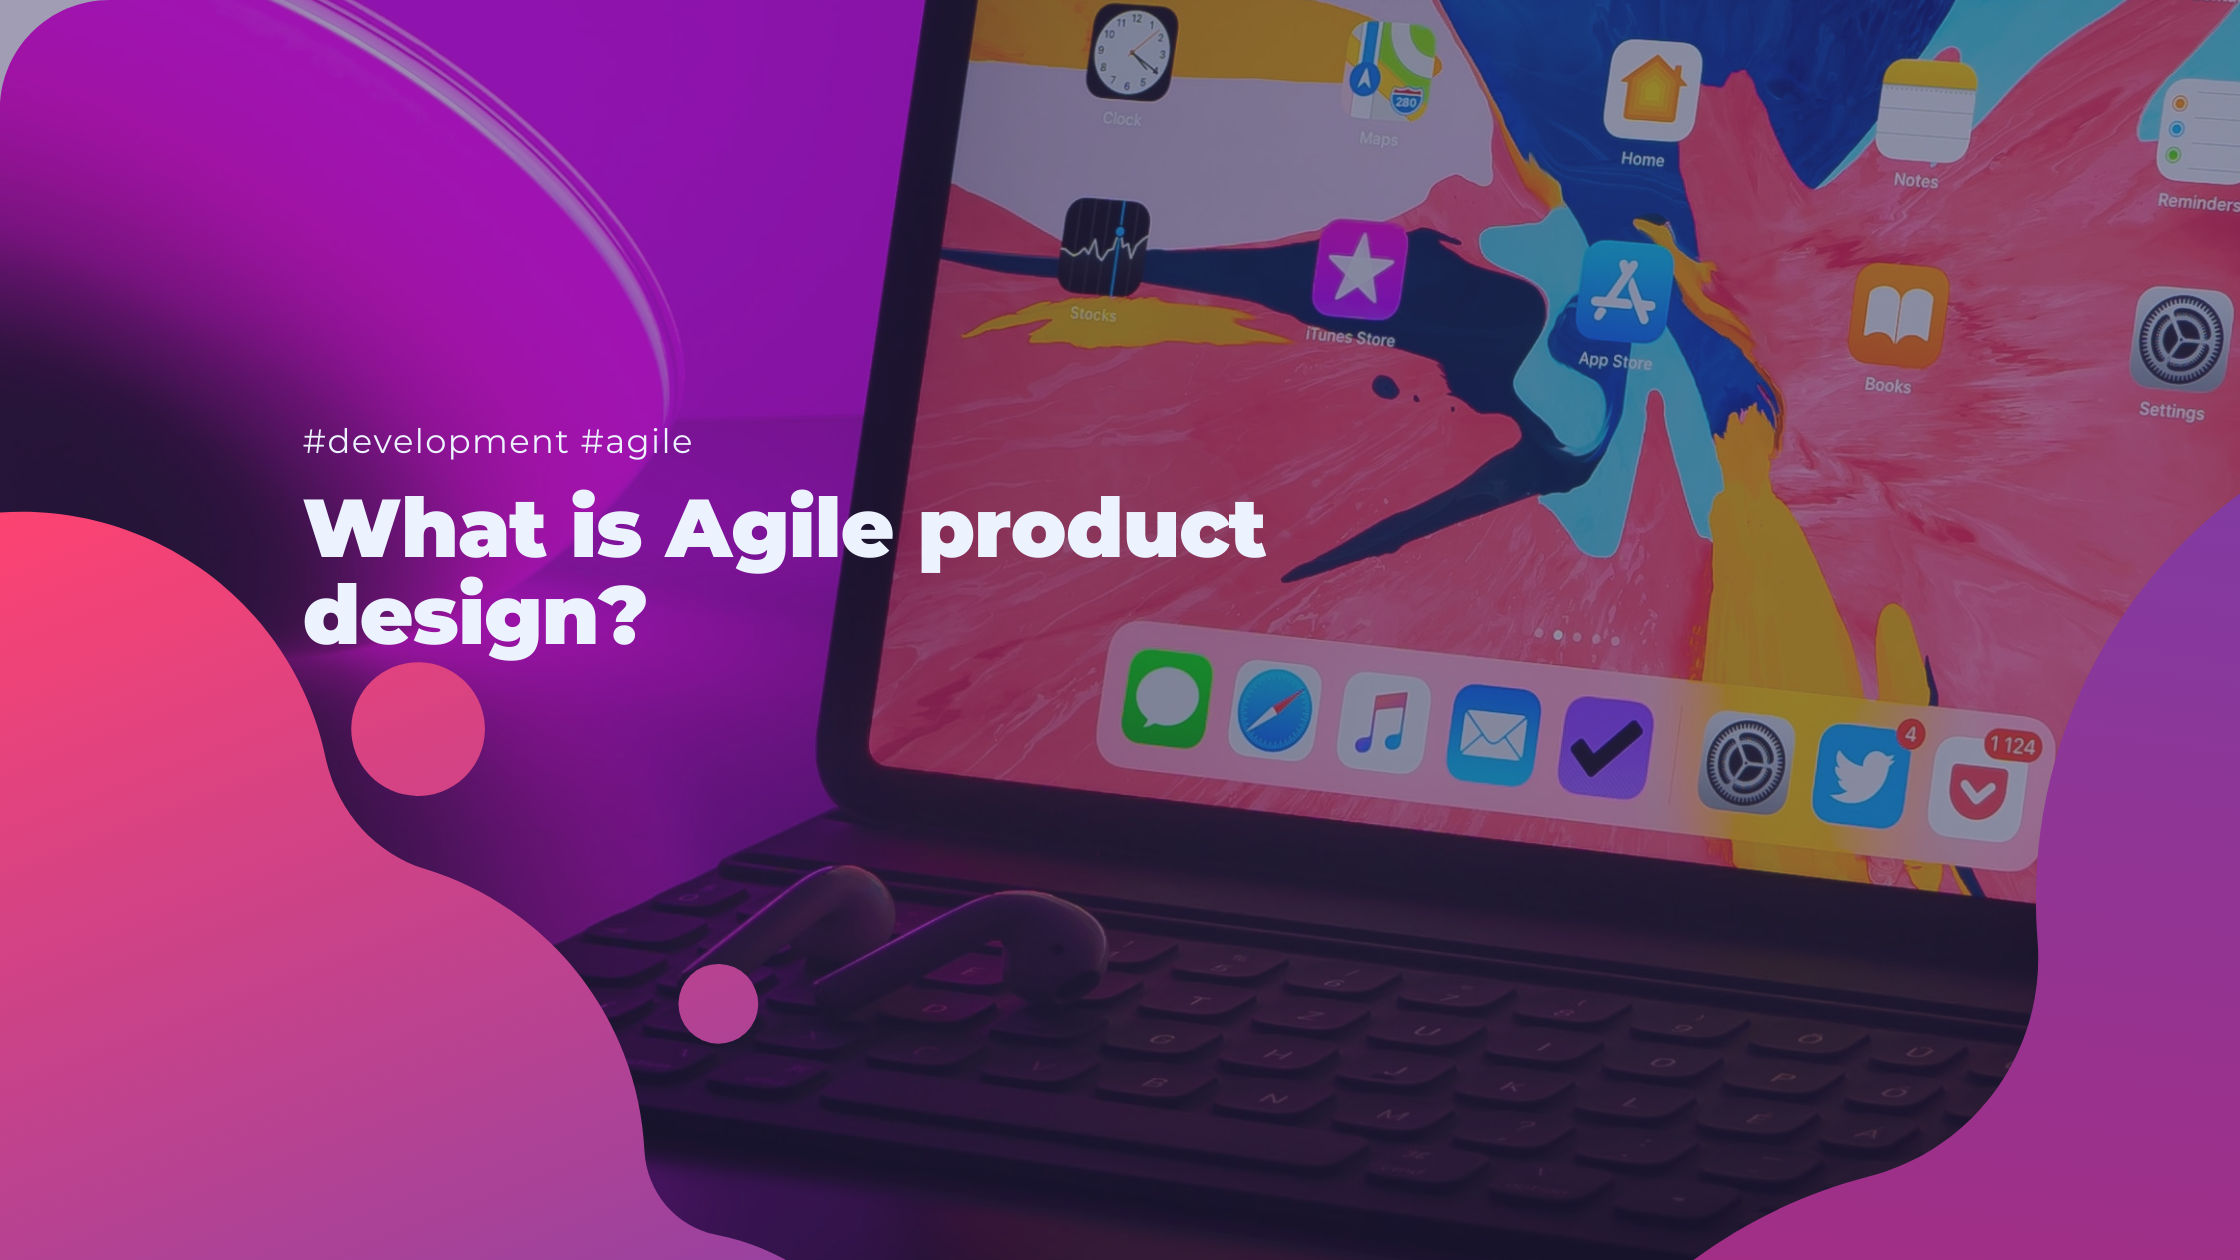 What is Agile product design?